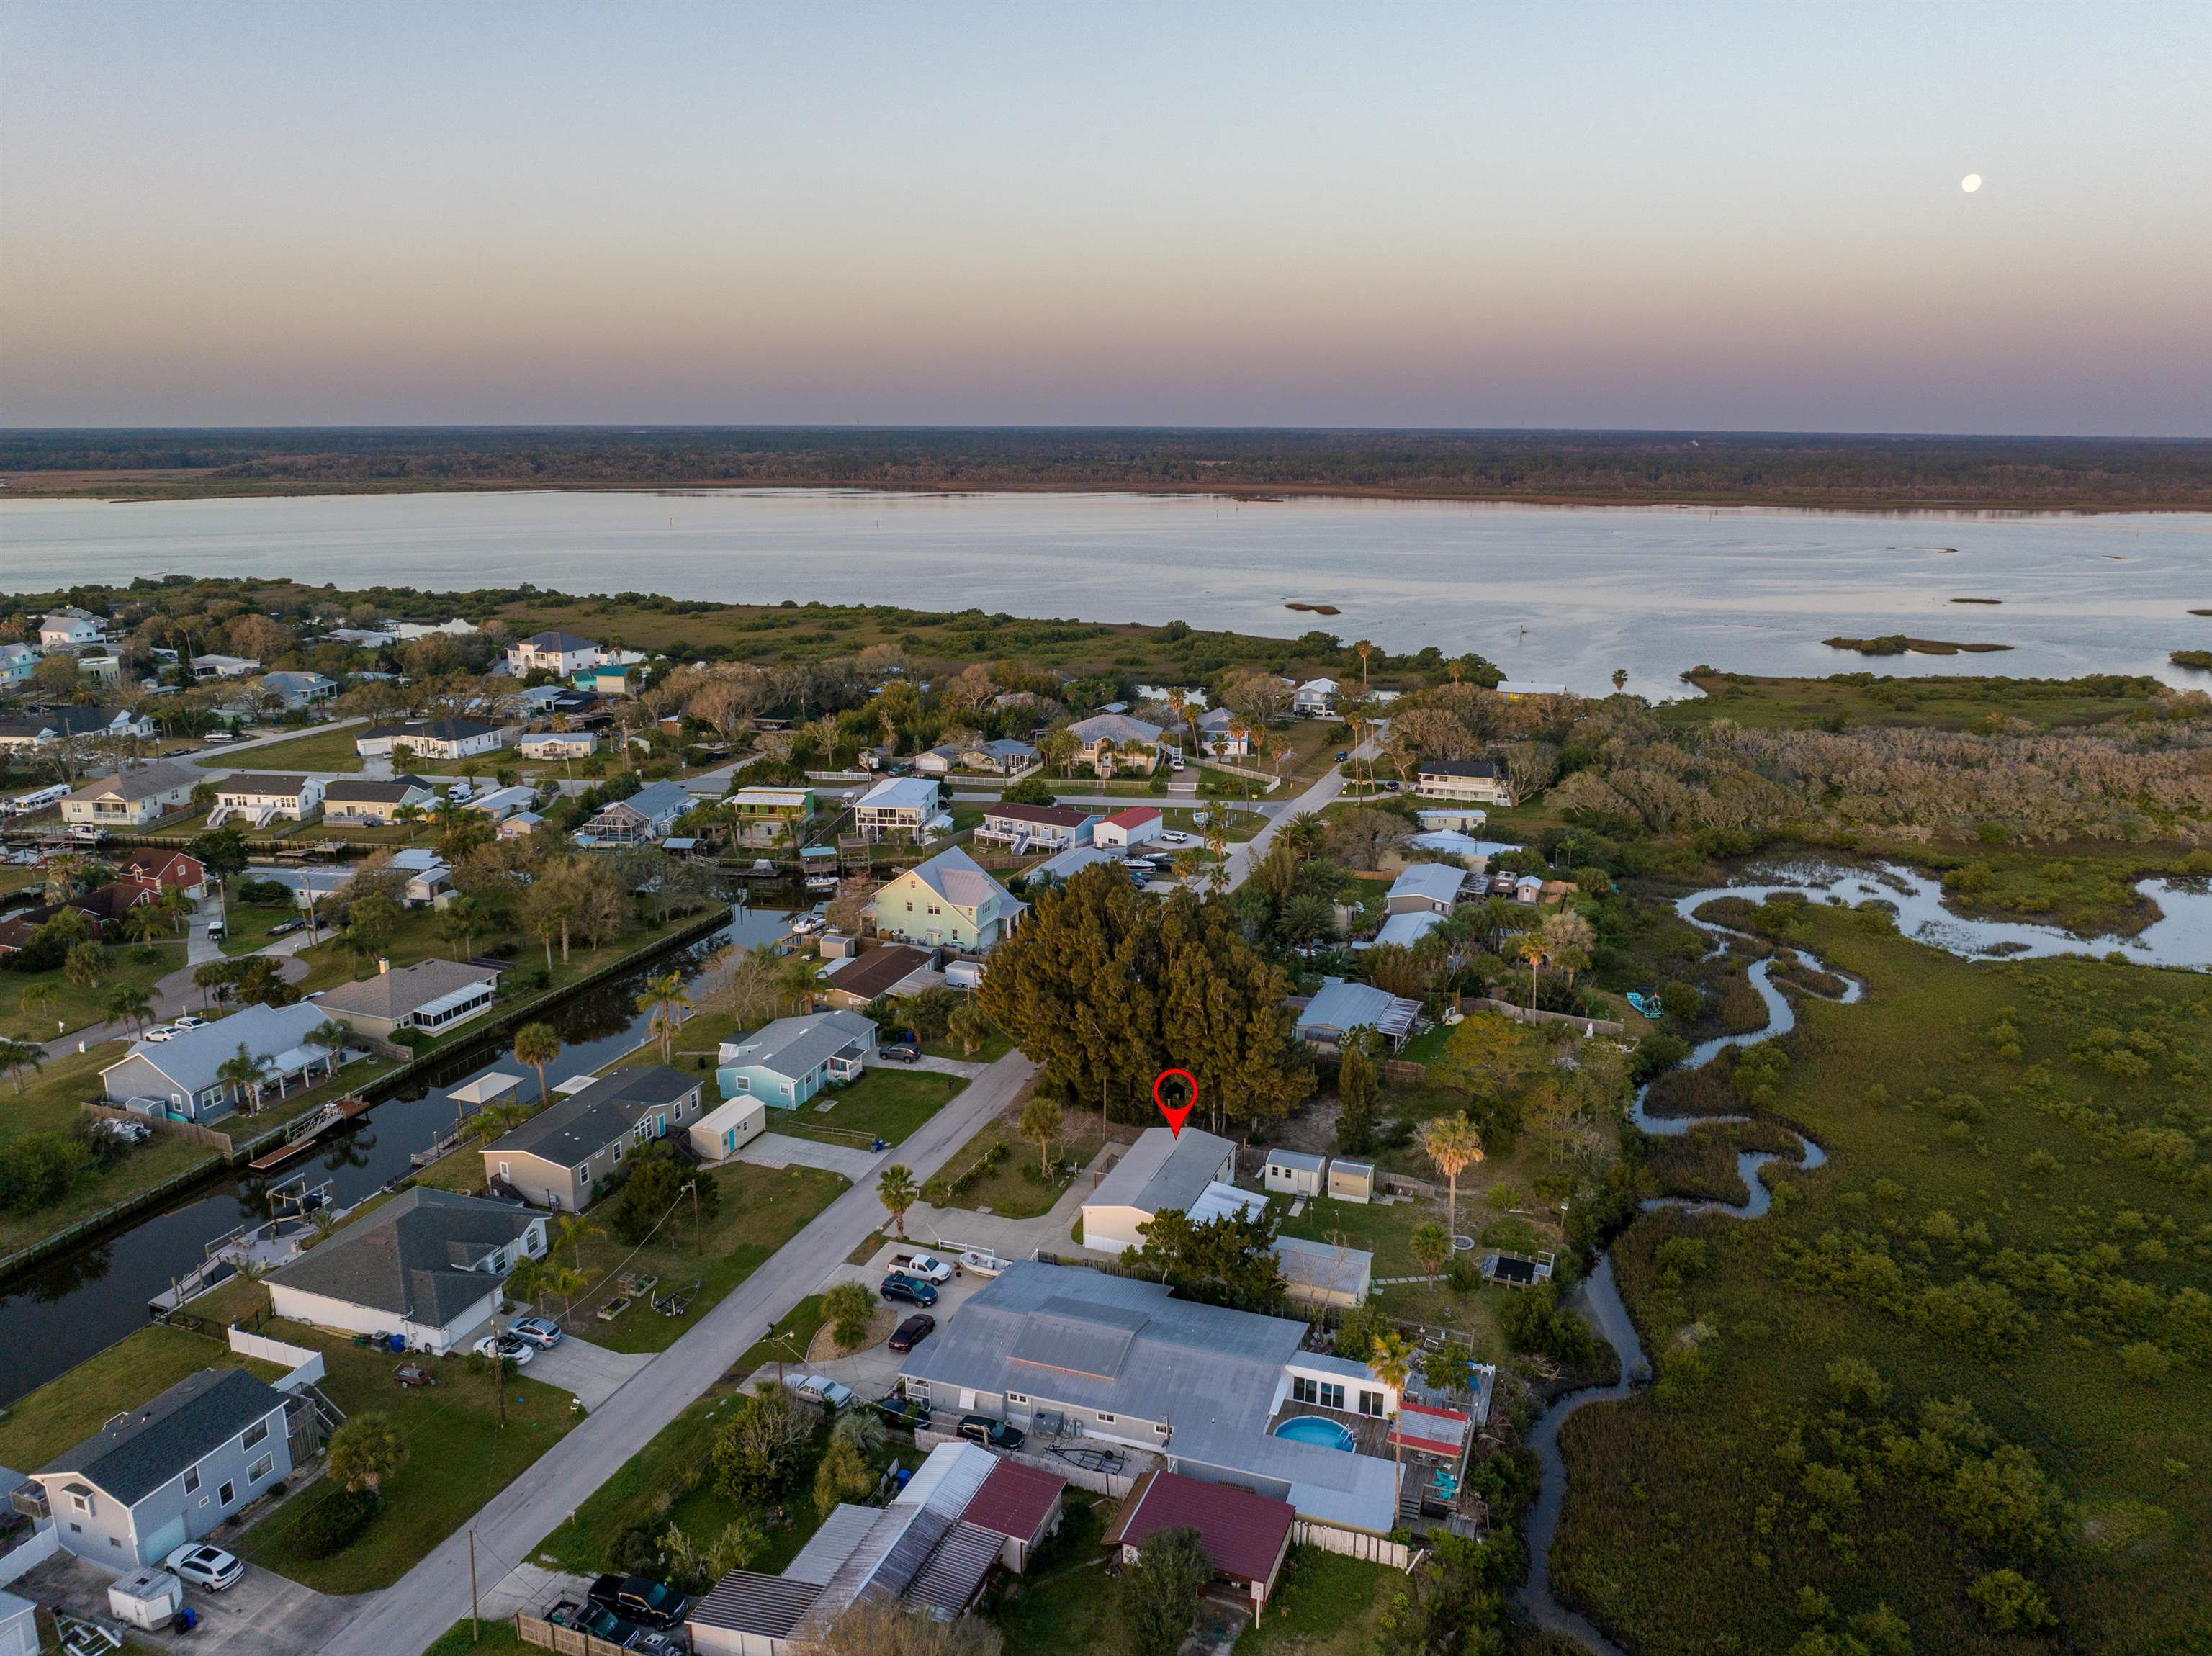 Aerial view at dusk with a water view